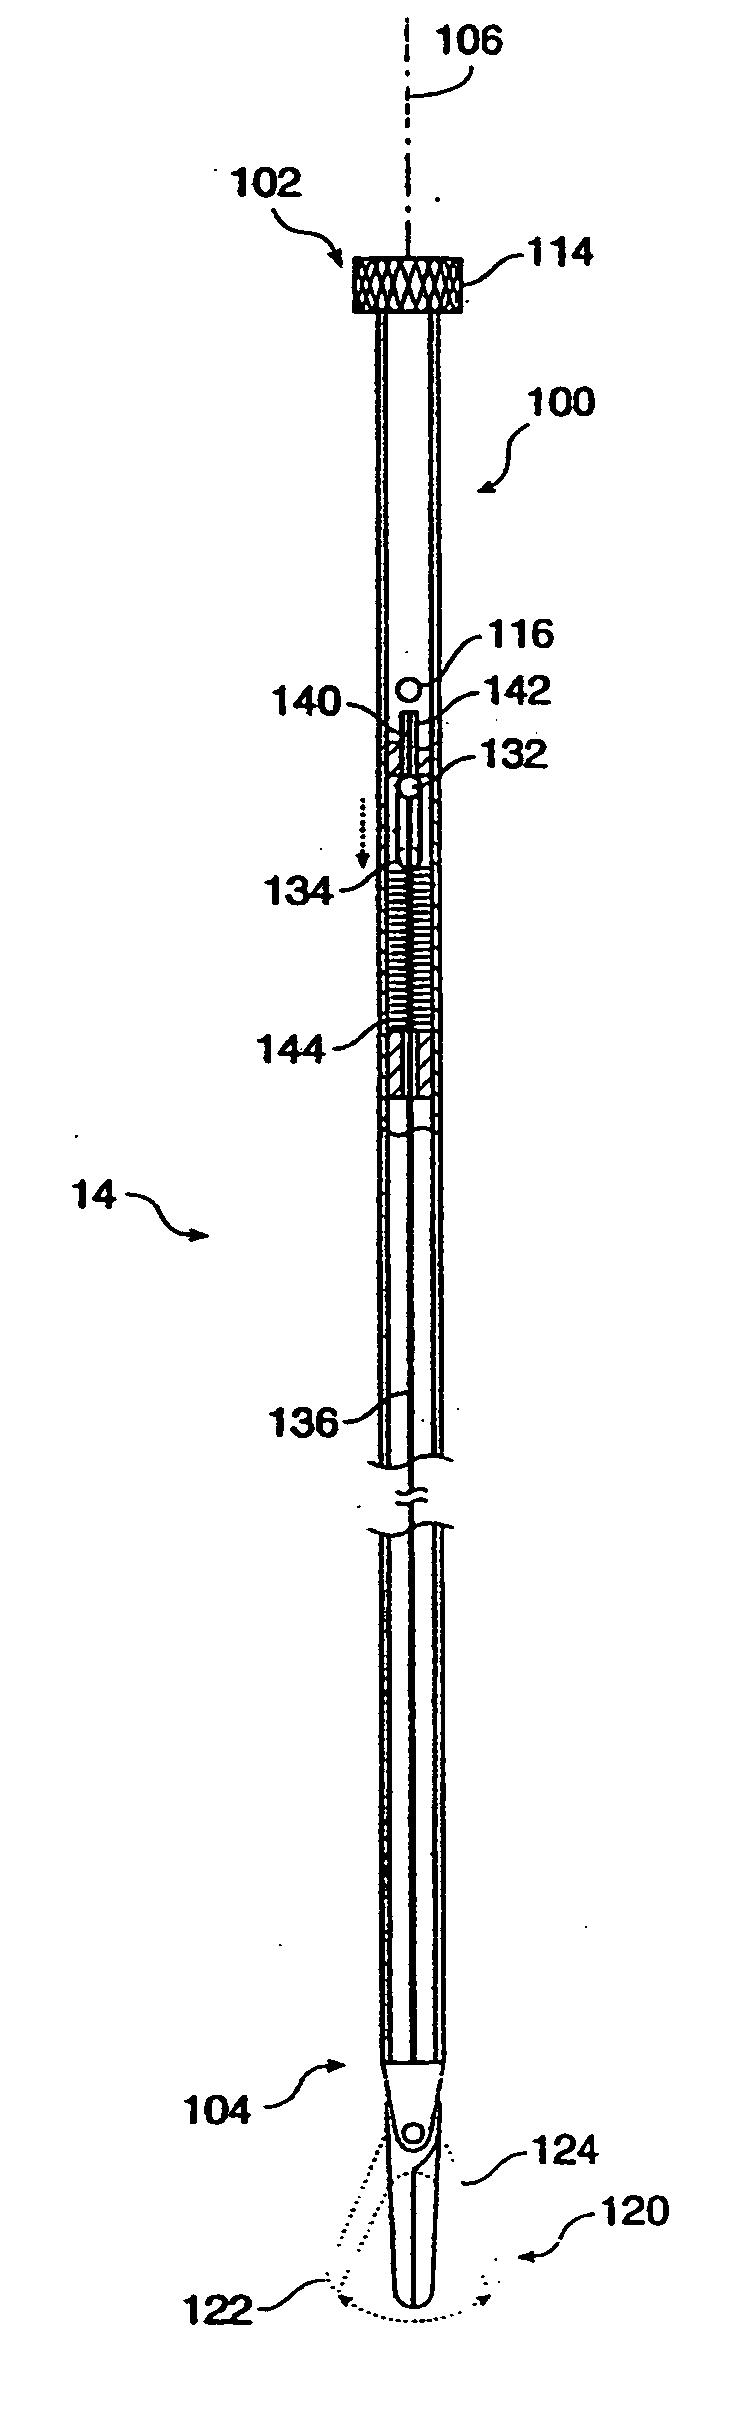 System and method for releasably holding a surgical instrument